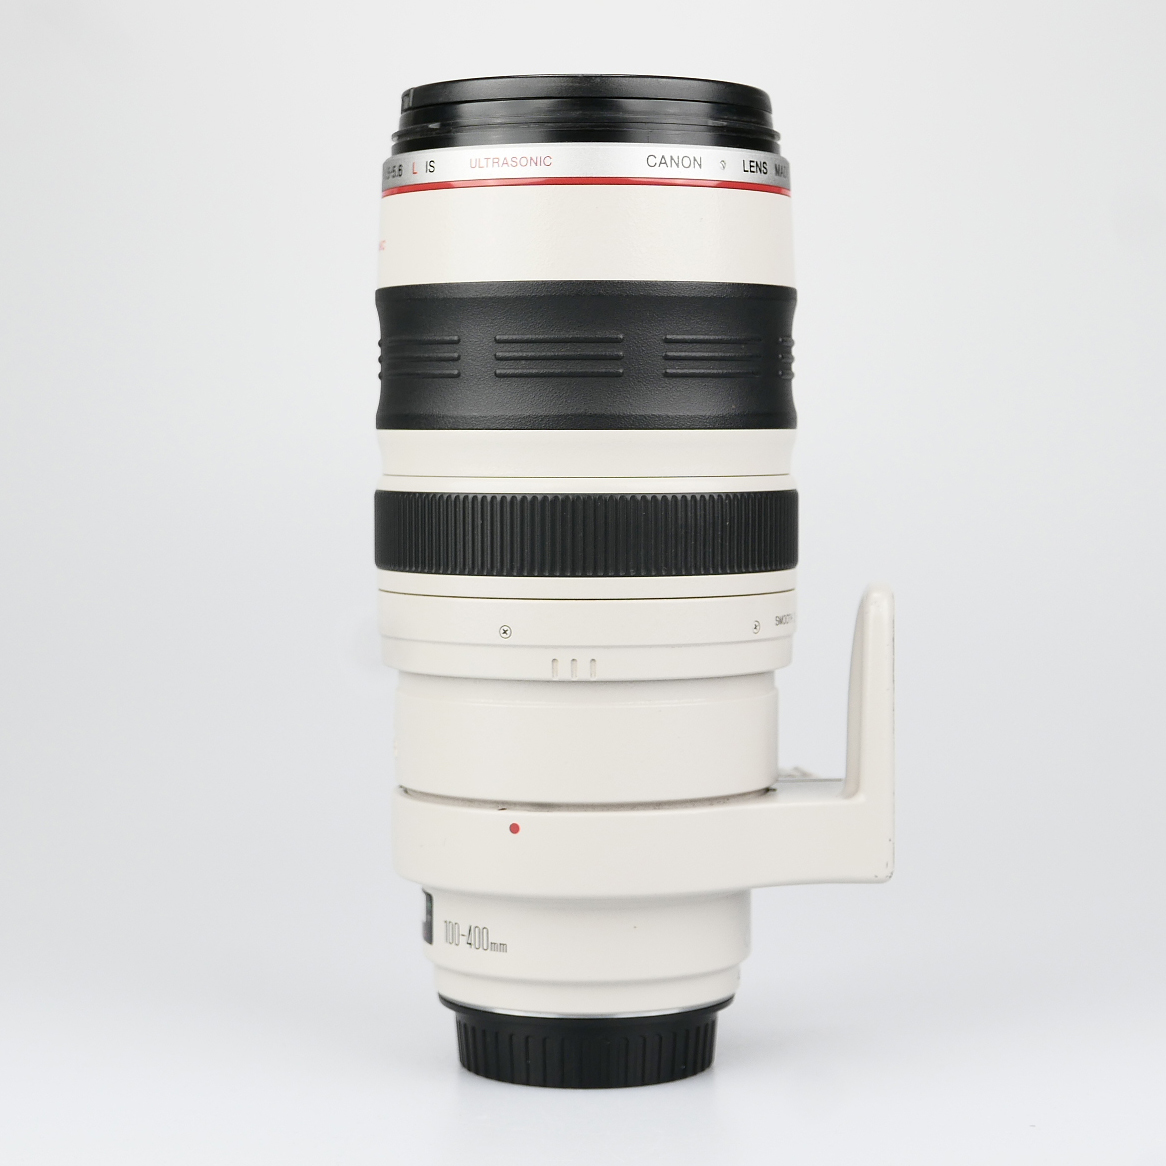 (Myyty) Canon EF 100-400mm f/4.5-5.6L IS USM (käytetty)